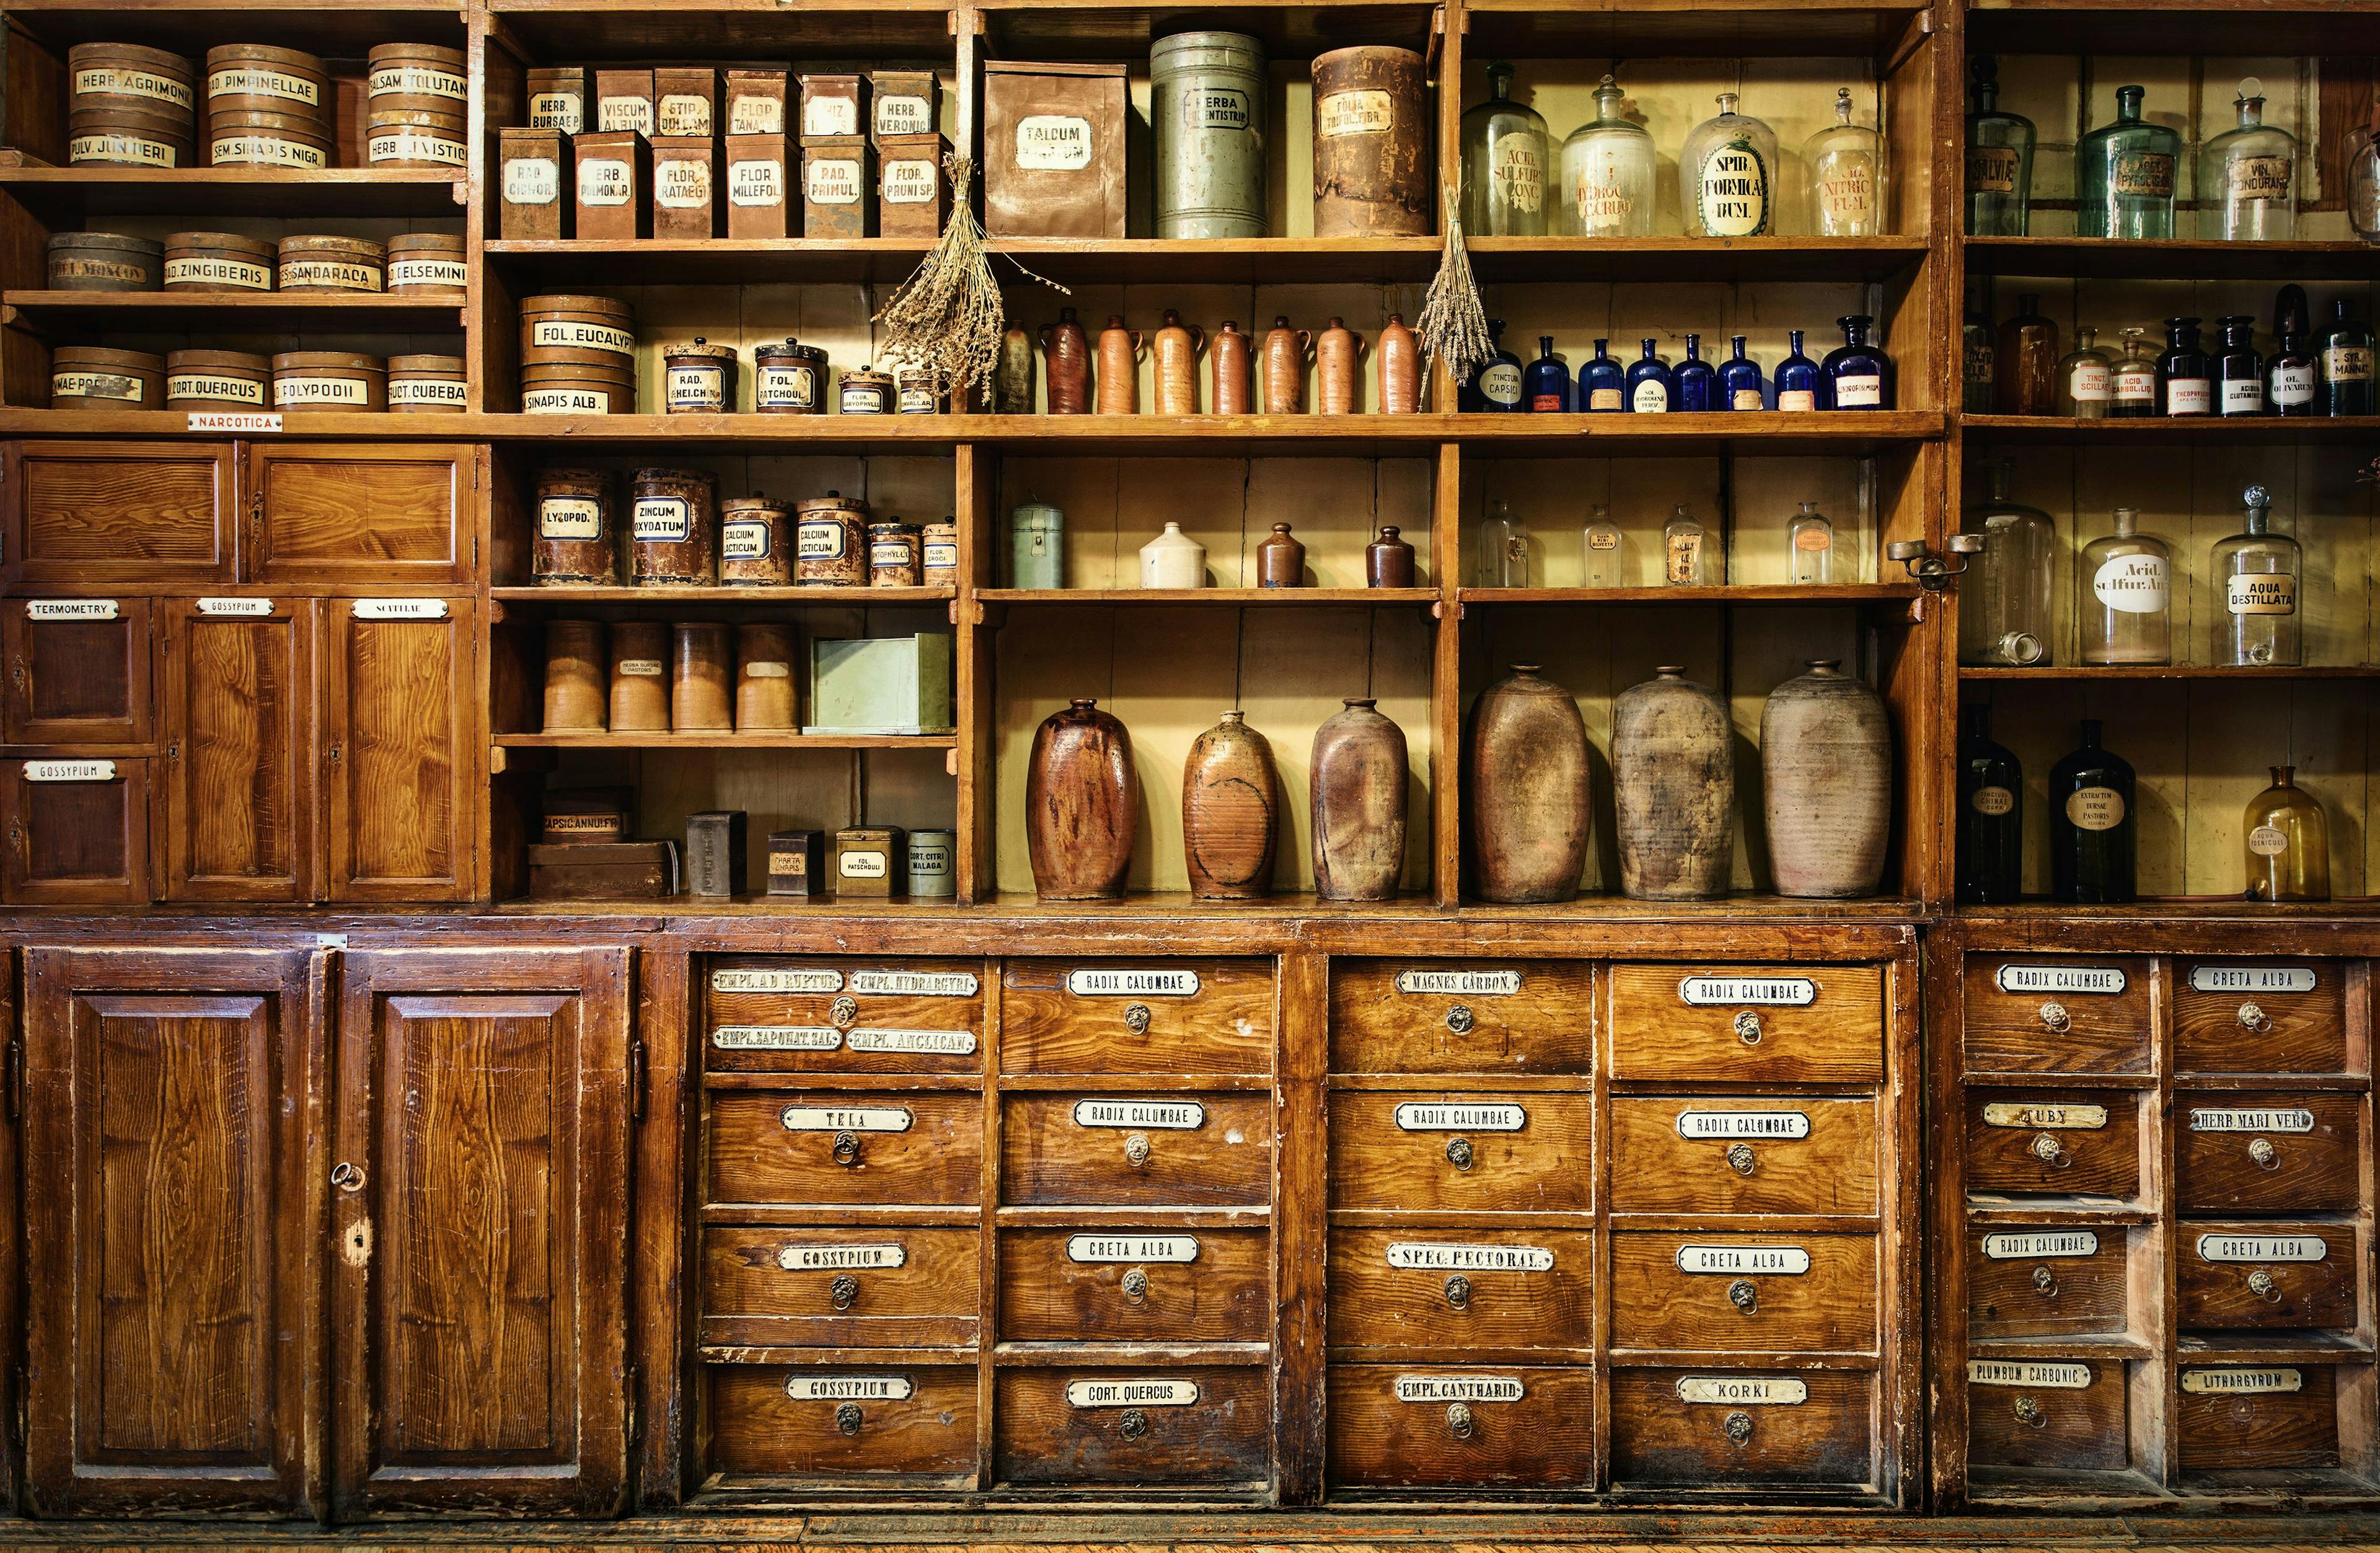 Two centuries later in the United States, apothecarists became more commonly known as pharmacists, which is a shift that has been attributed to Edward Parrish of the American Pharmaceutical Association, as it was then known. Image Credit: © Tryfonov - stock.adobe.com